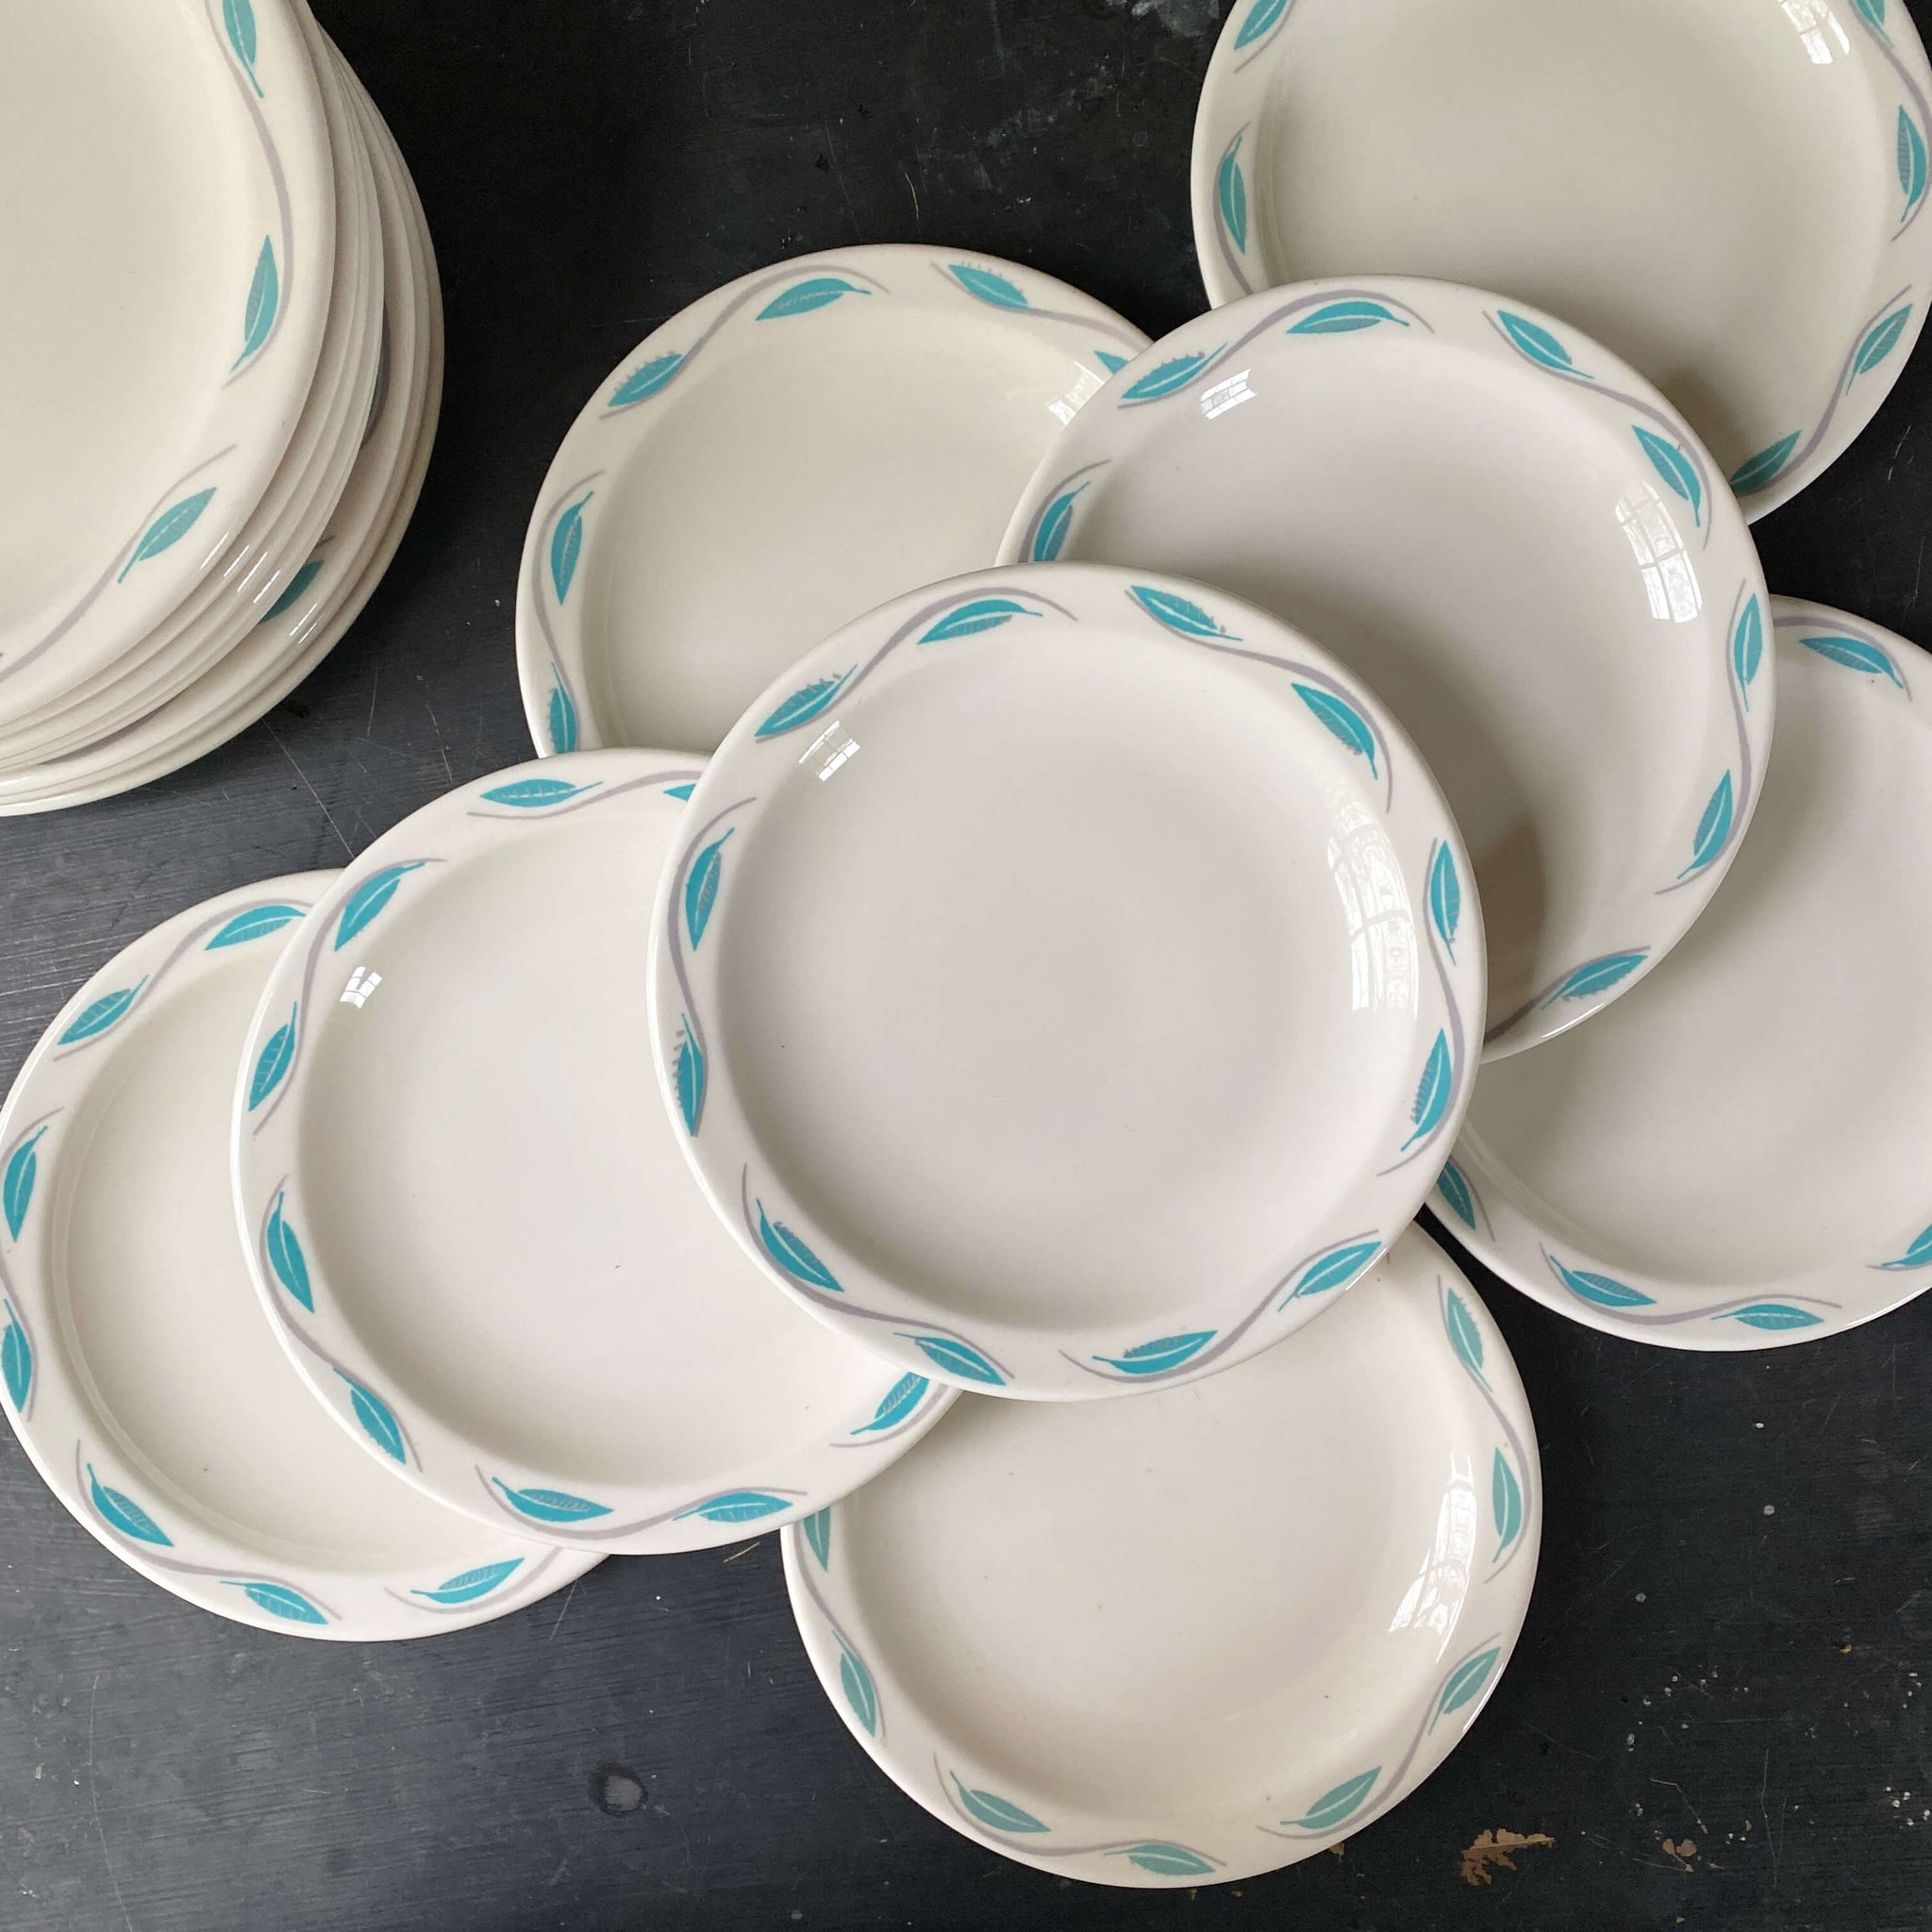 Vintage Homer Laughlin Turquoise Leaf Restaurant Ware Plates and Cups circa 1960s-1980s